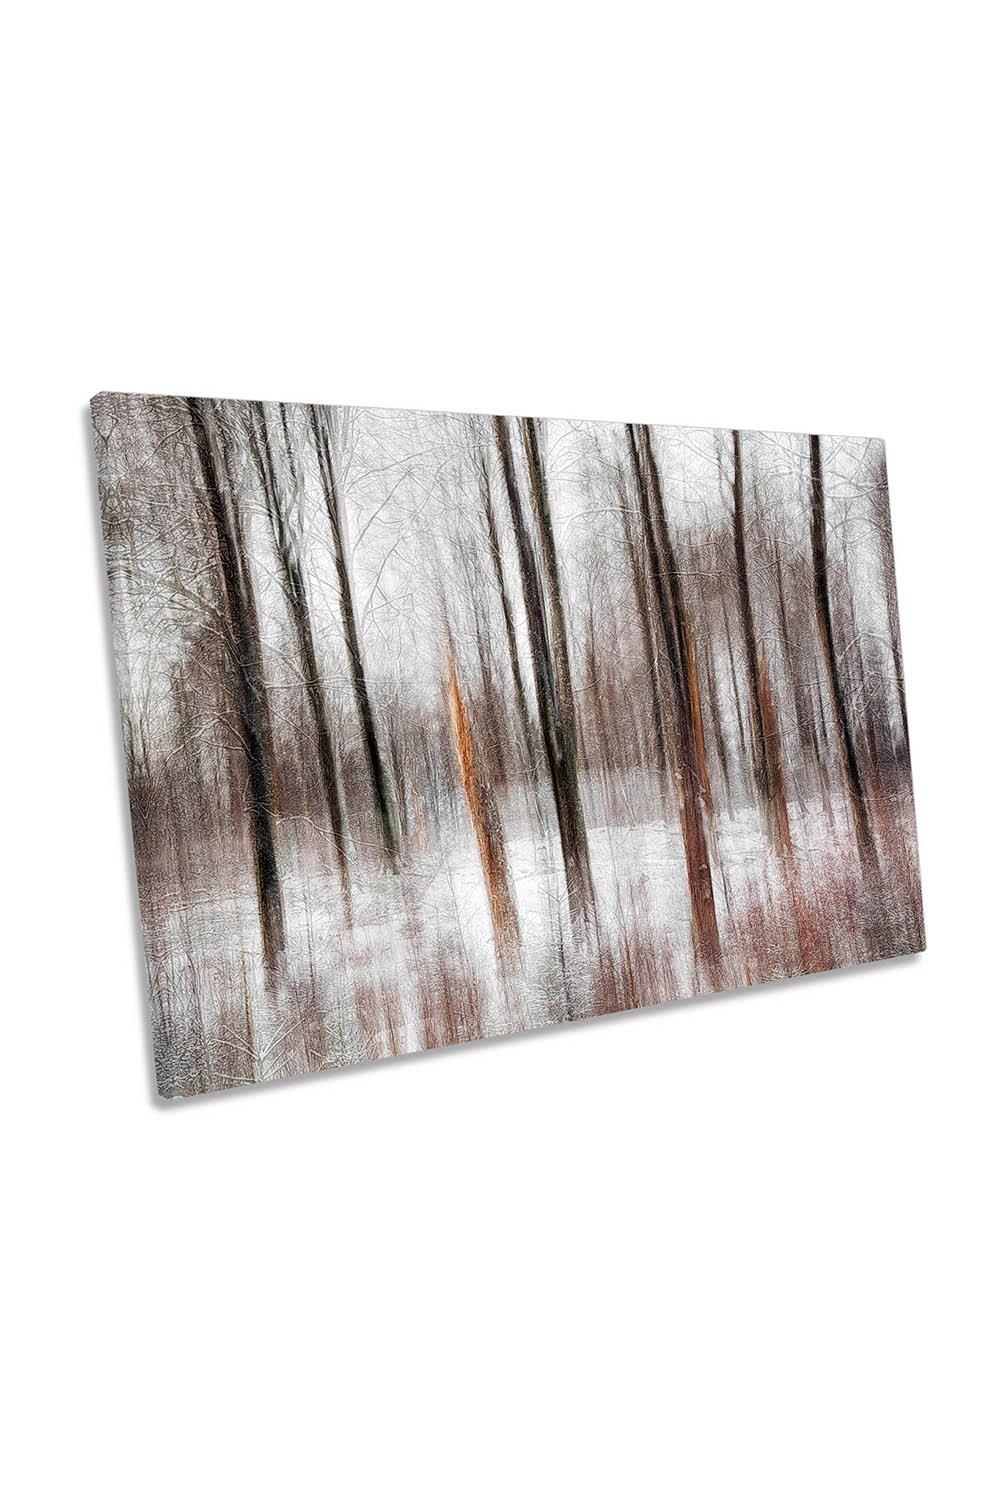 Winter Forest Trees Abstract Canvas Wall Art Picture Print